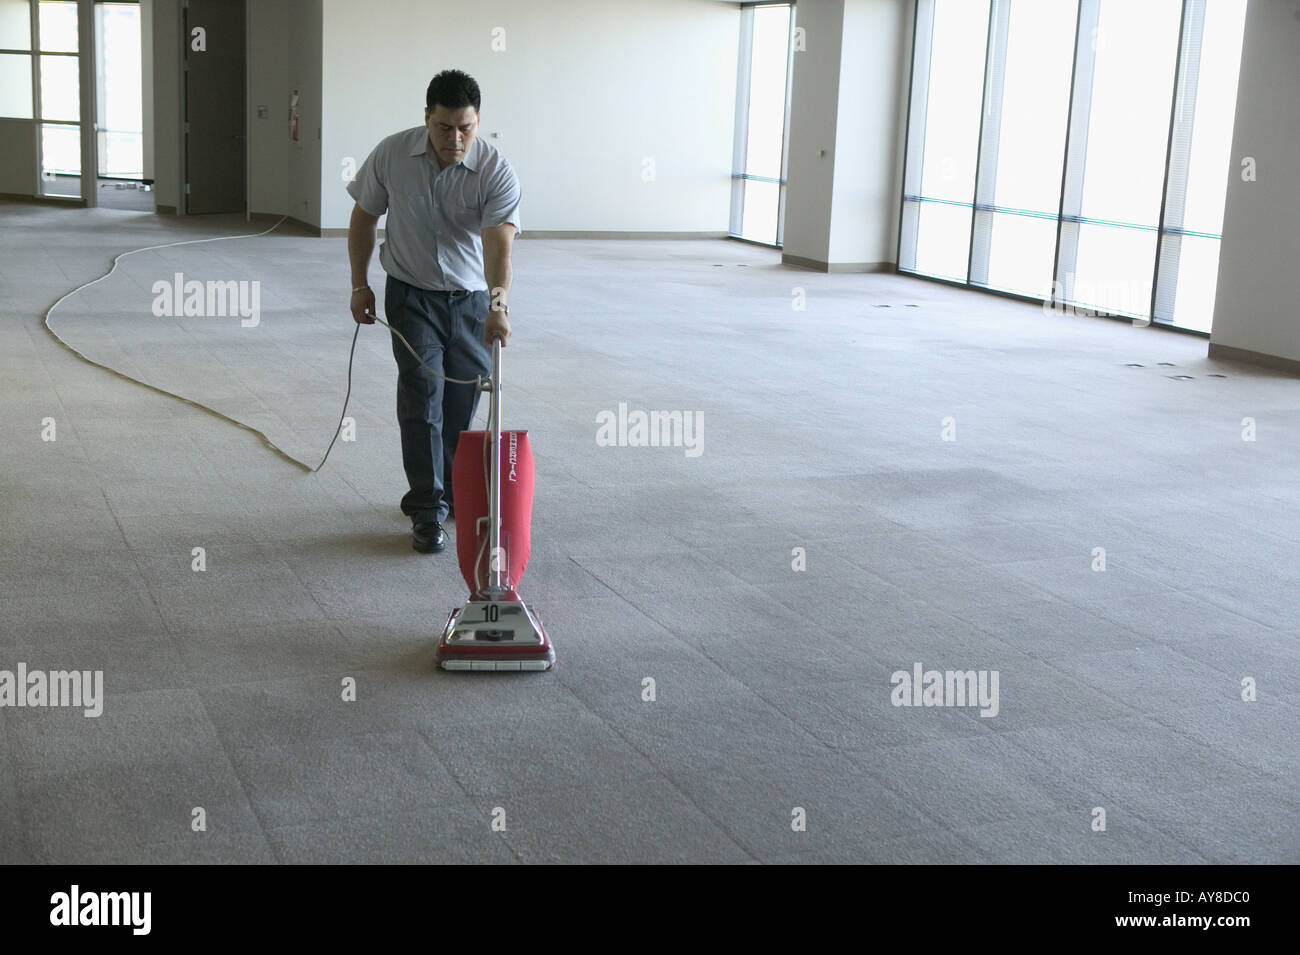 Vacant office building is being vacuumed by janitor after company moved out or about to move in Stock Photo